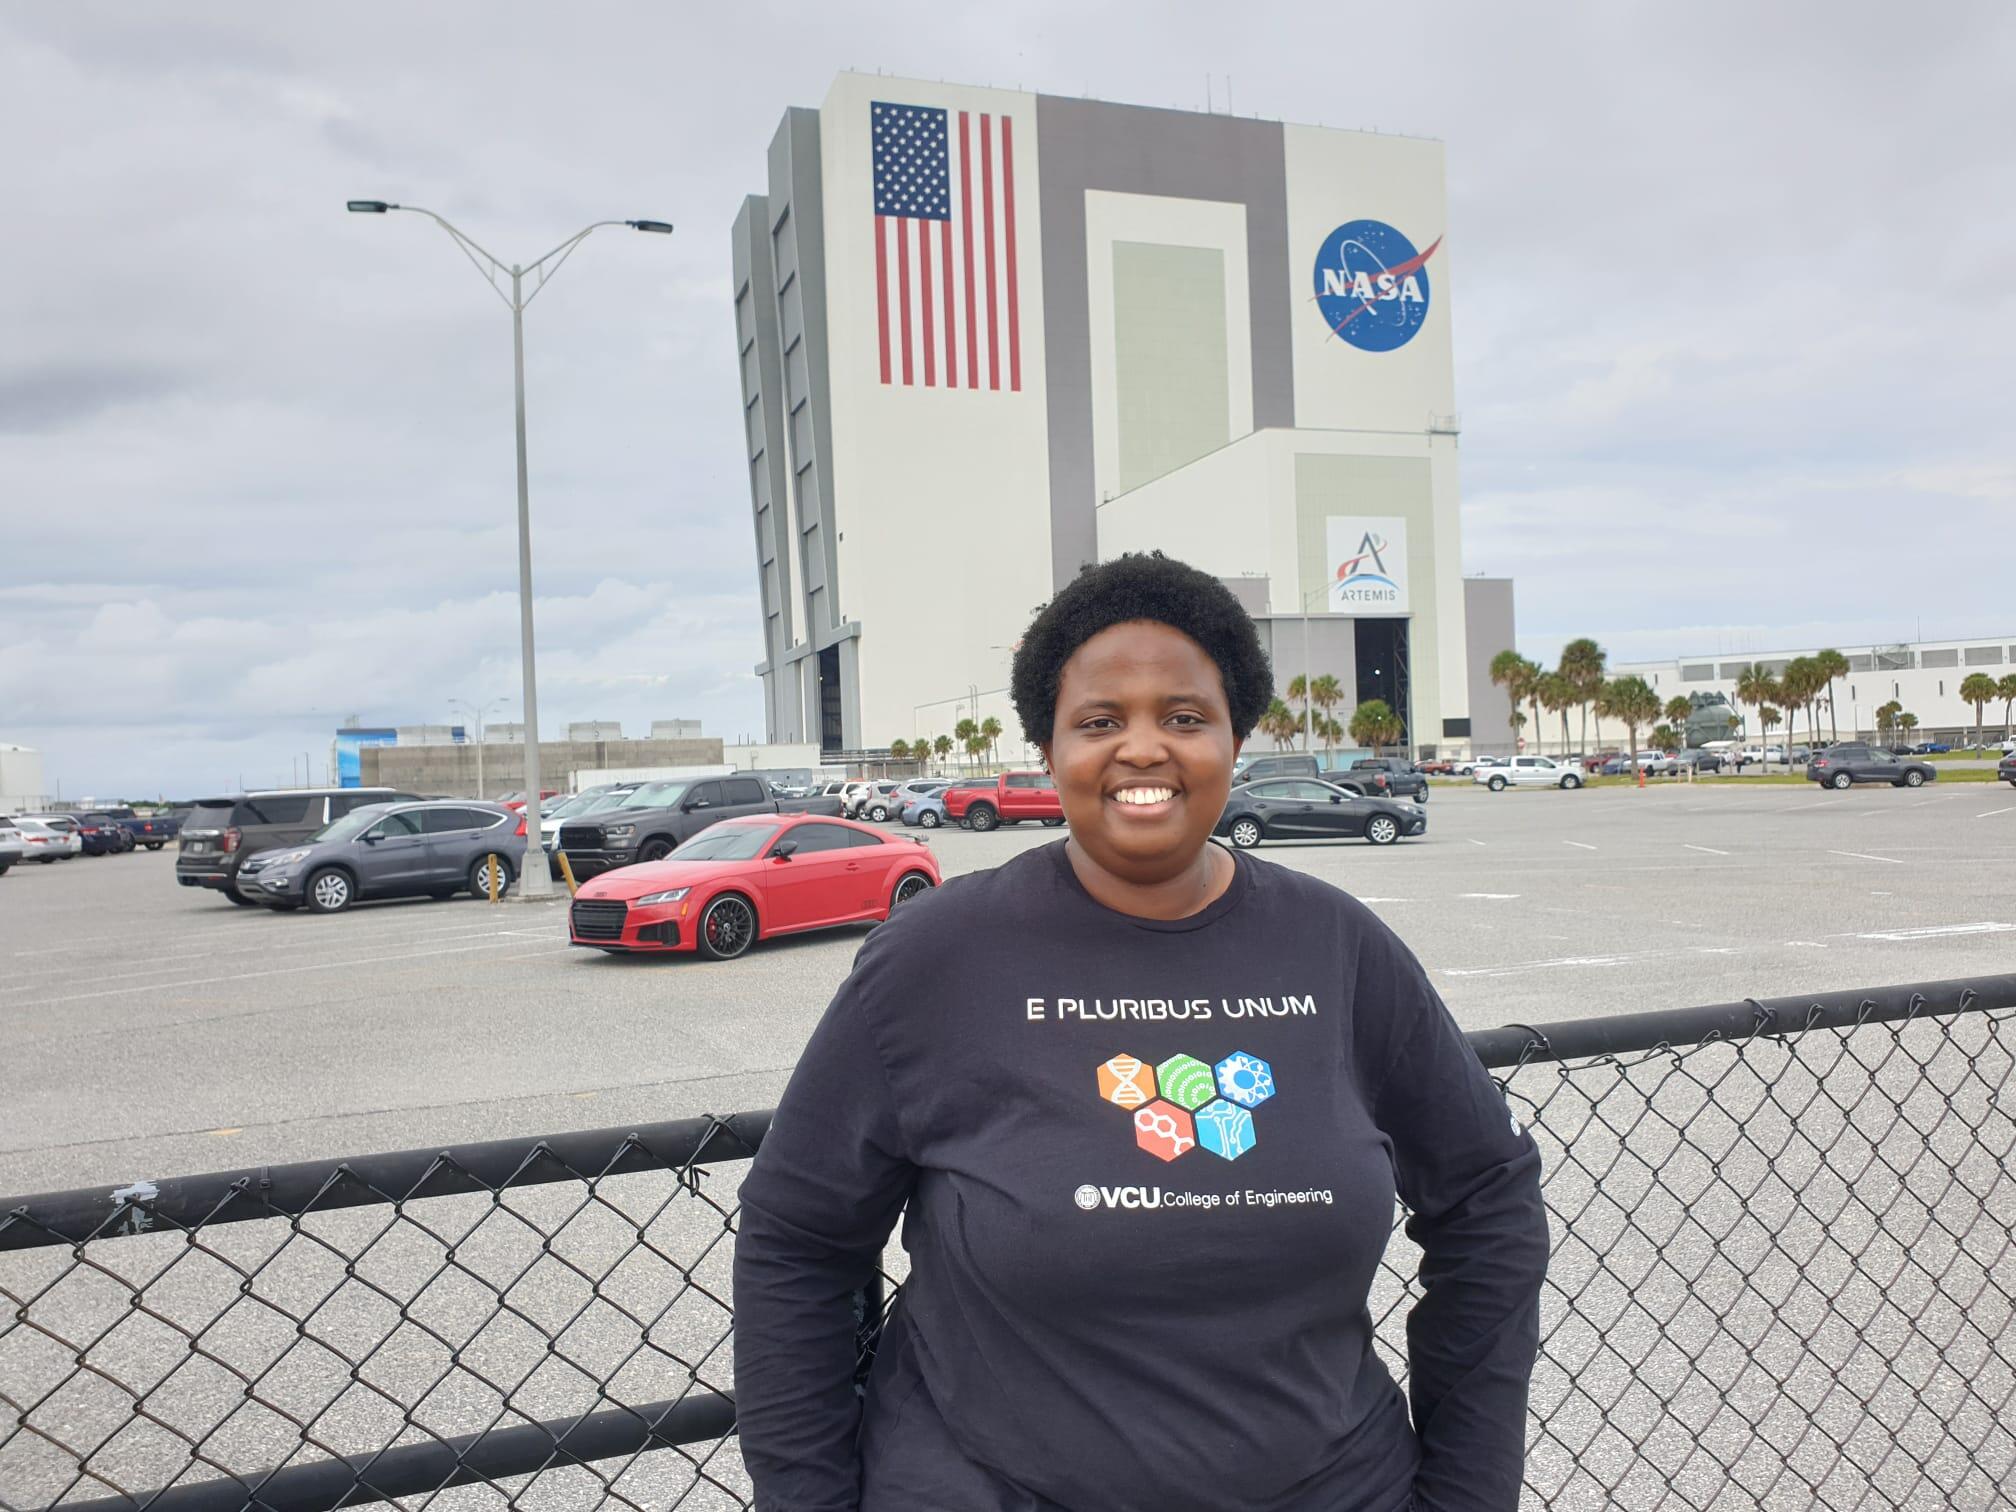 A woman standing in front of a NASA building